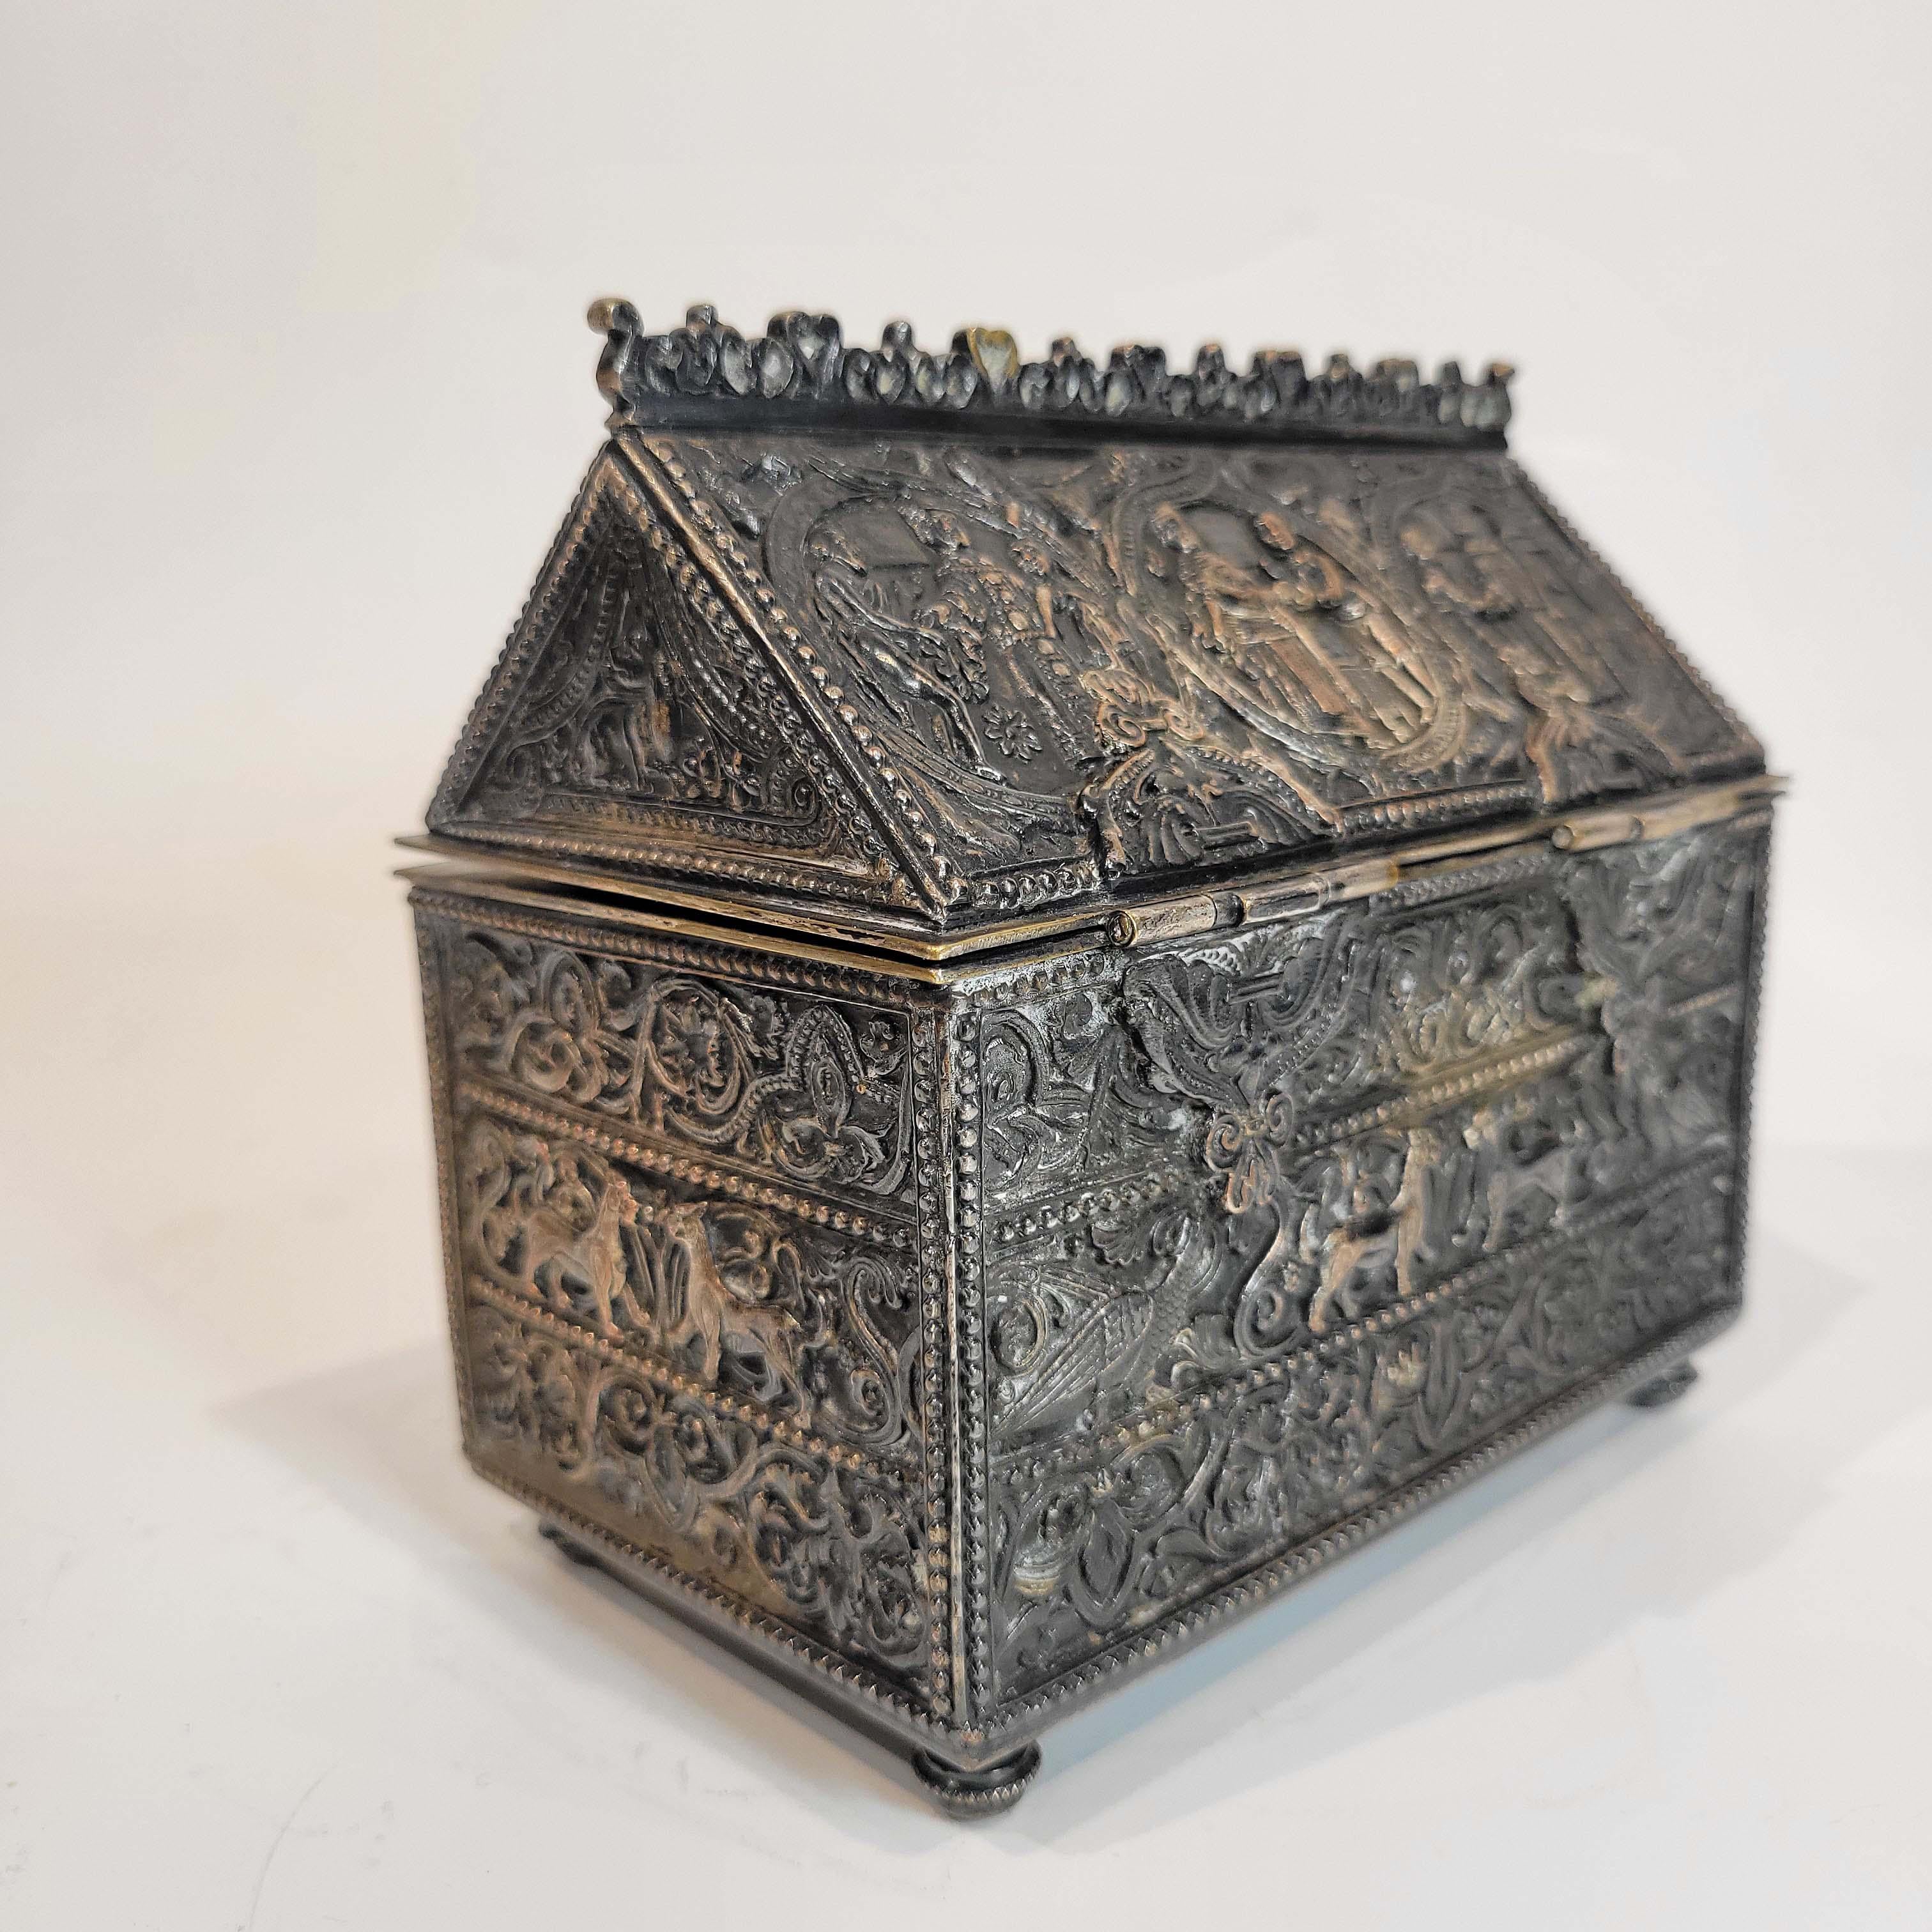 This is a beautifully decorated cigar box in 13th century French gothic decoration. Circa late 19th century, stamped 